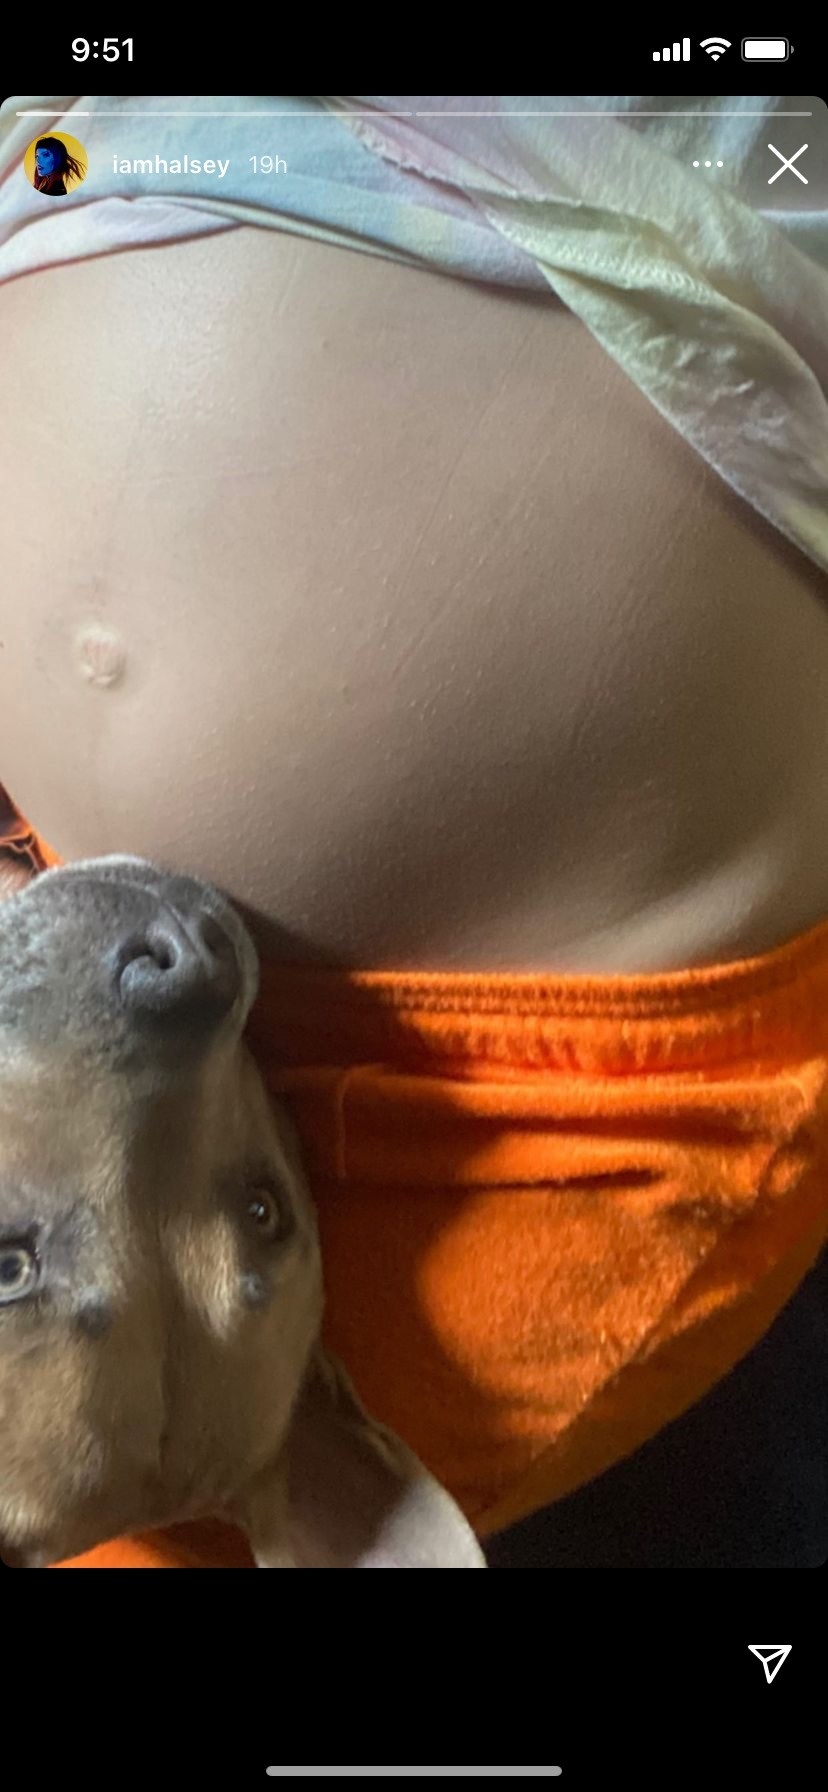 Halsey&#x27;s bare baby bump with their dog peeking his head into the photo